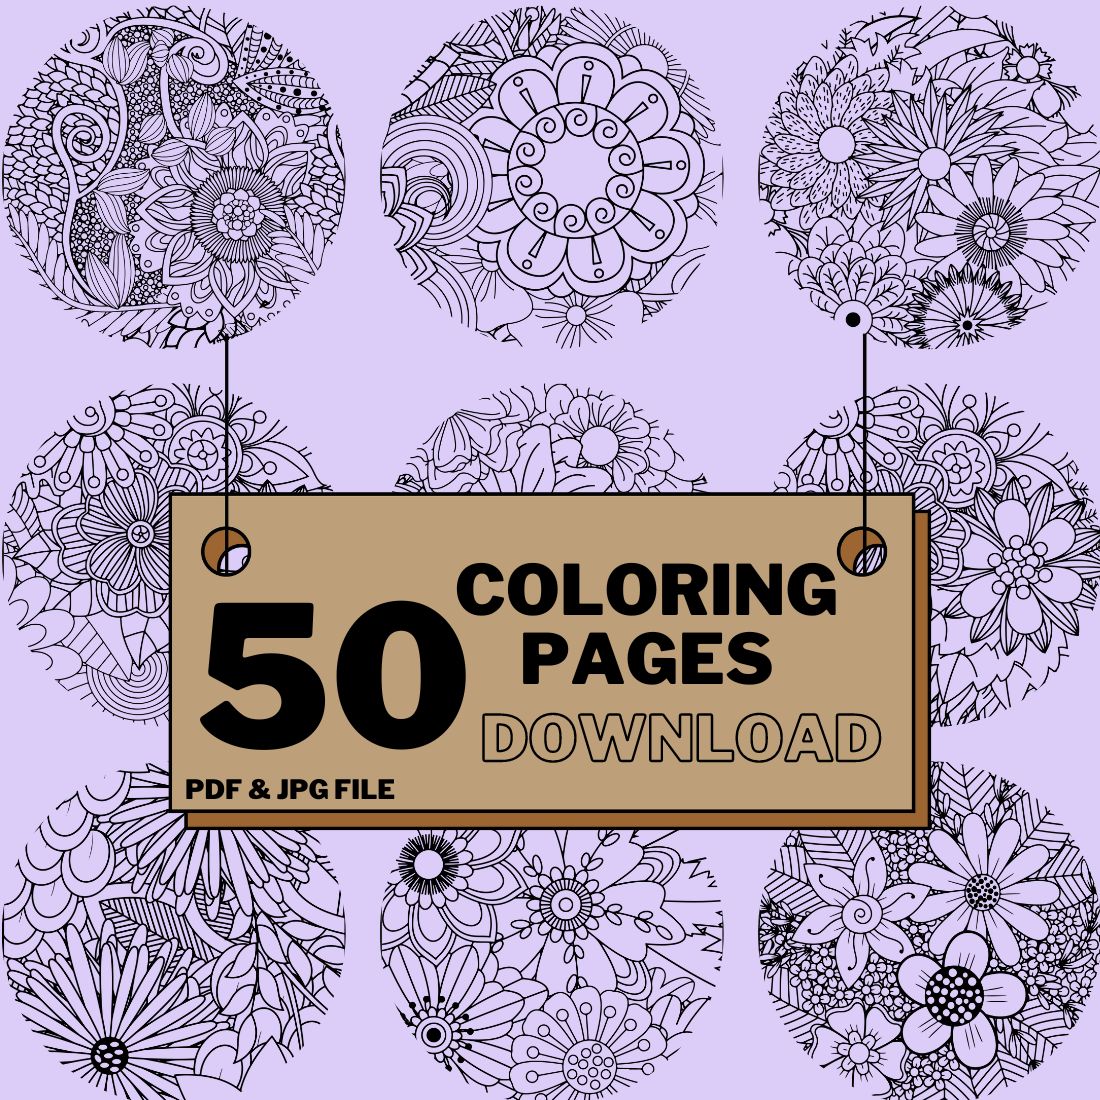 Serenity Mandalas: A Captivating Collection of 50 Digital Coloring Pages Bundle cover image.